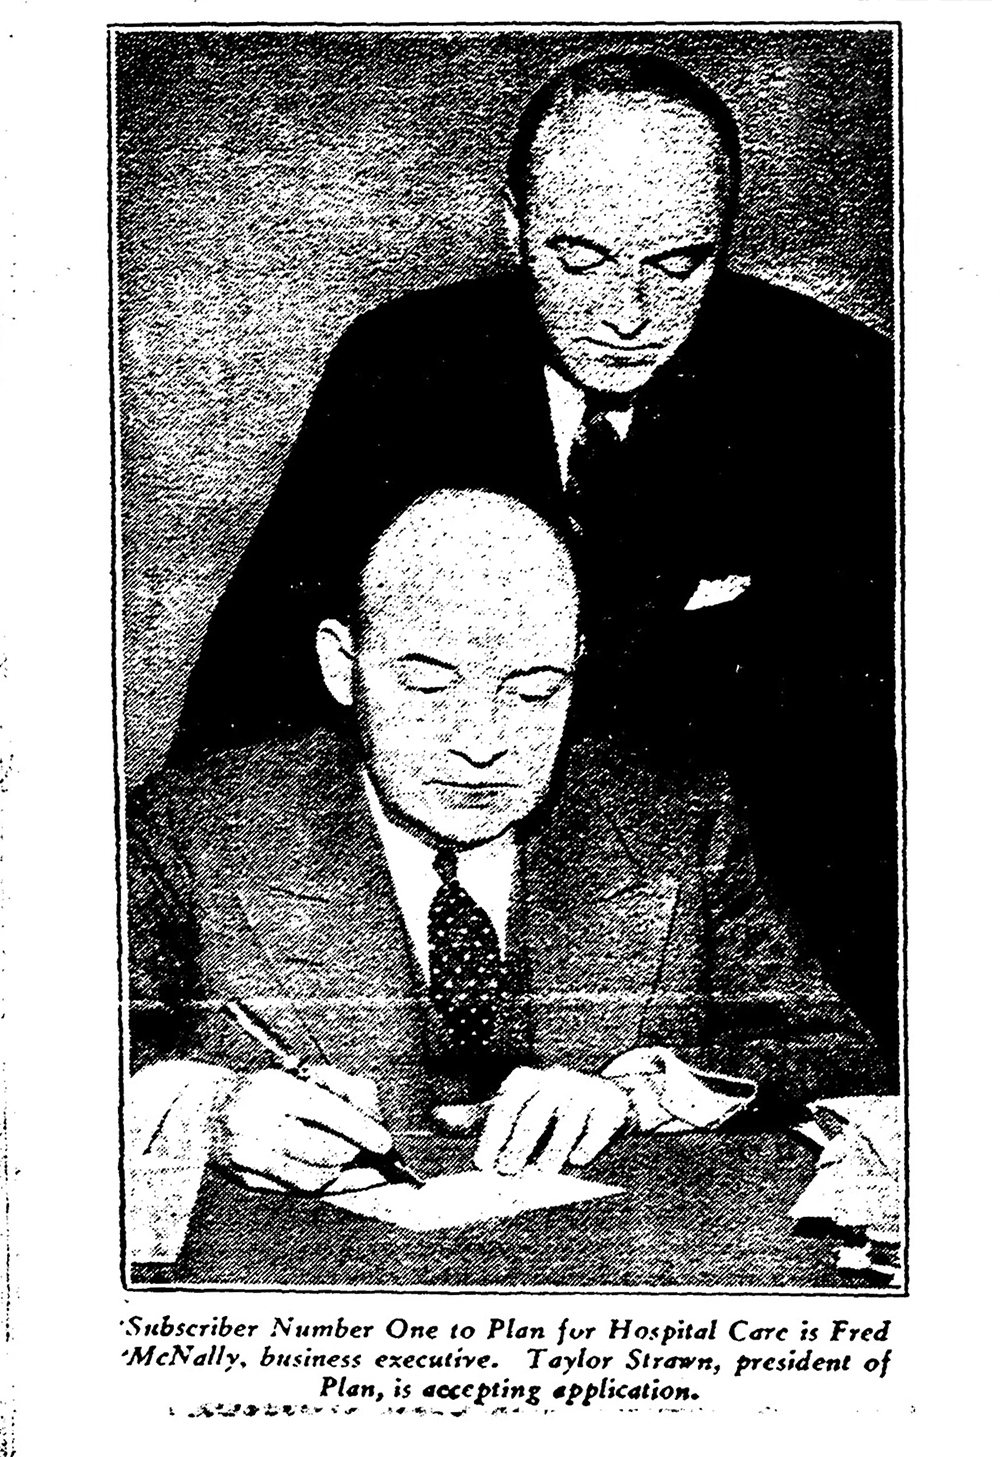 HCSC newspaper clipping of Fred McNally signing document